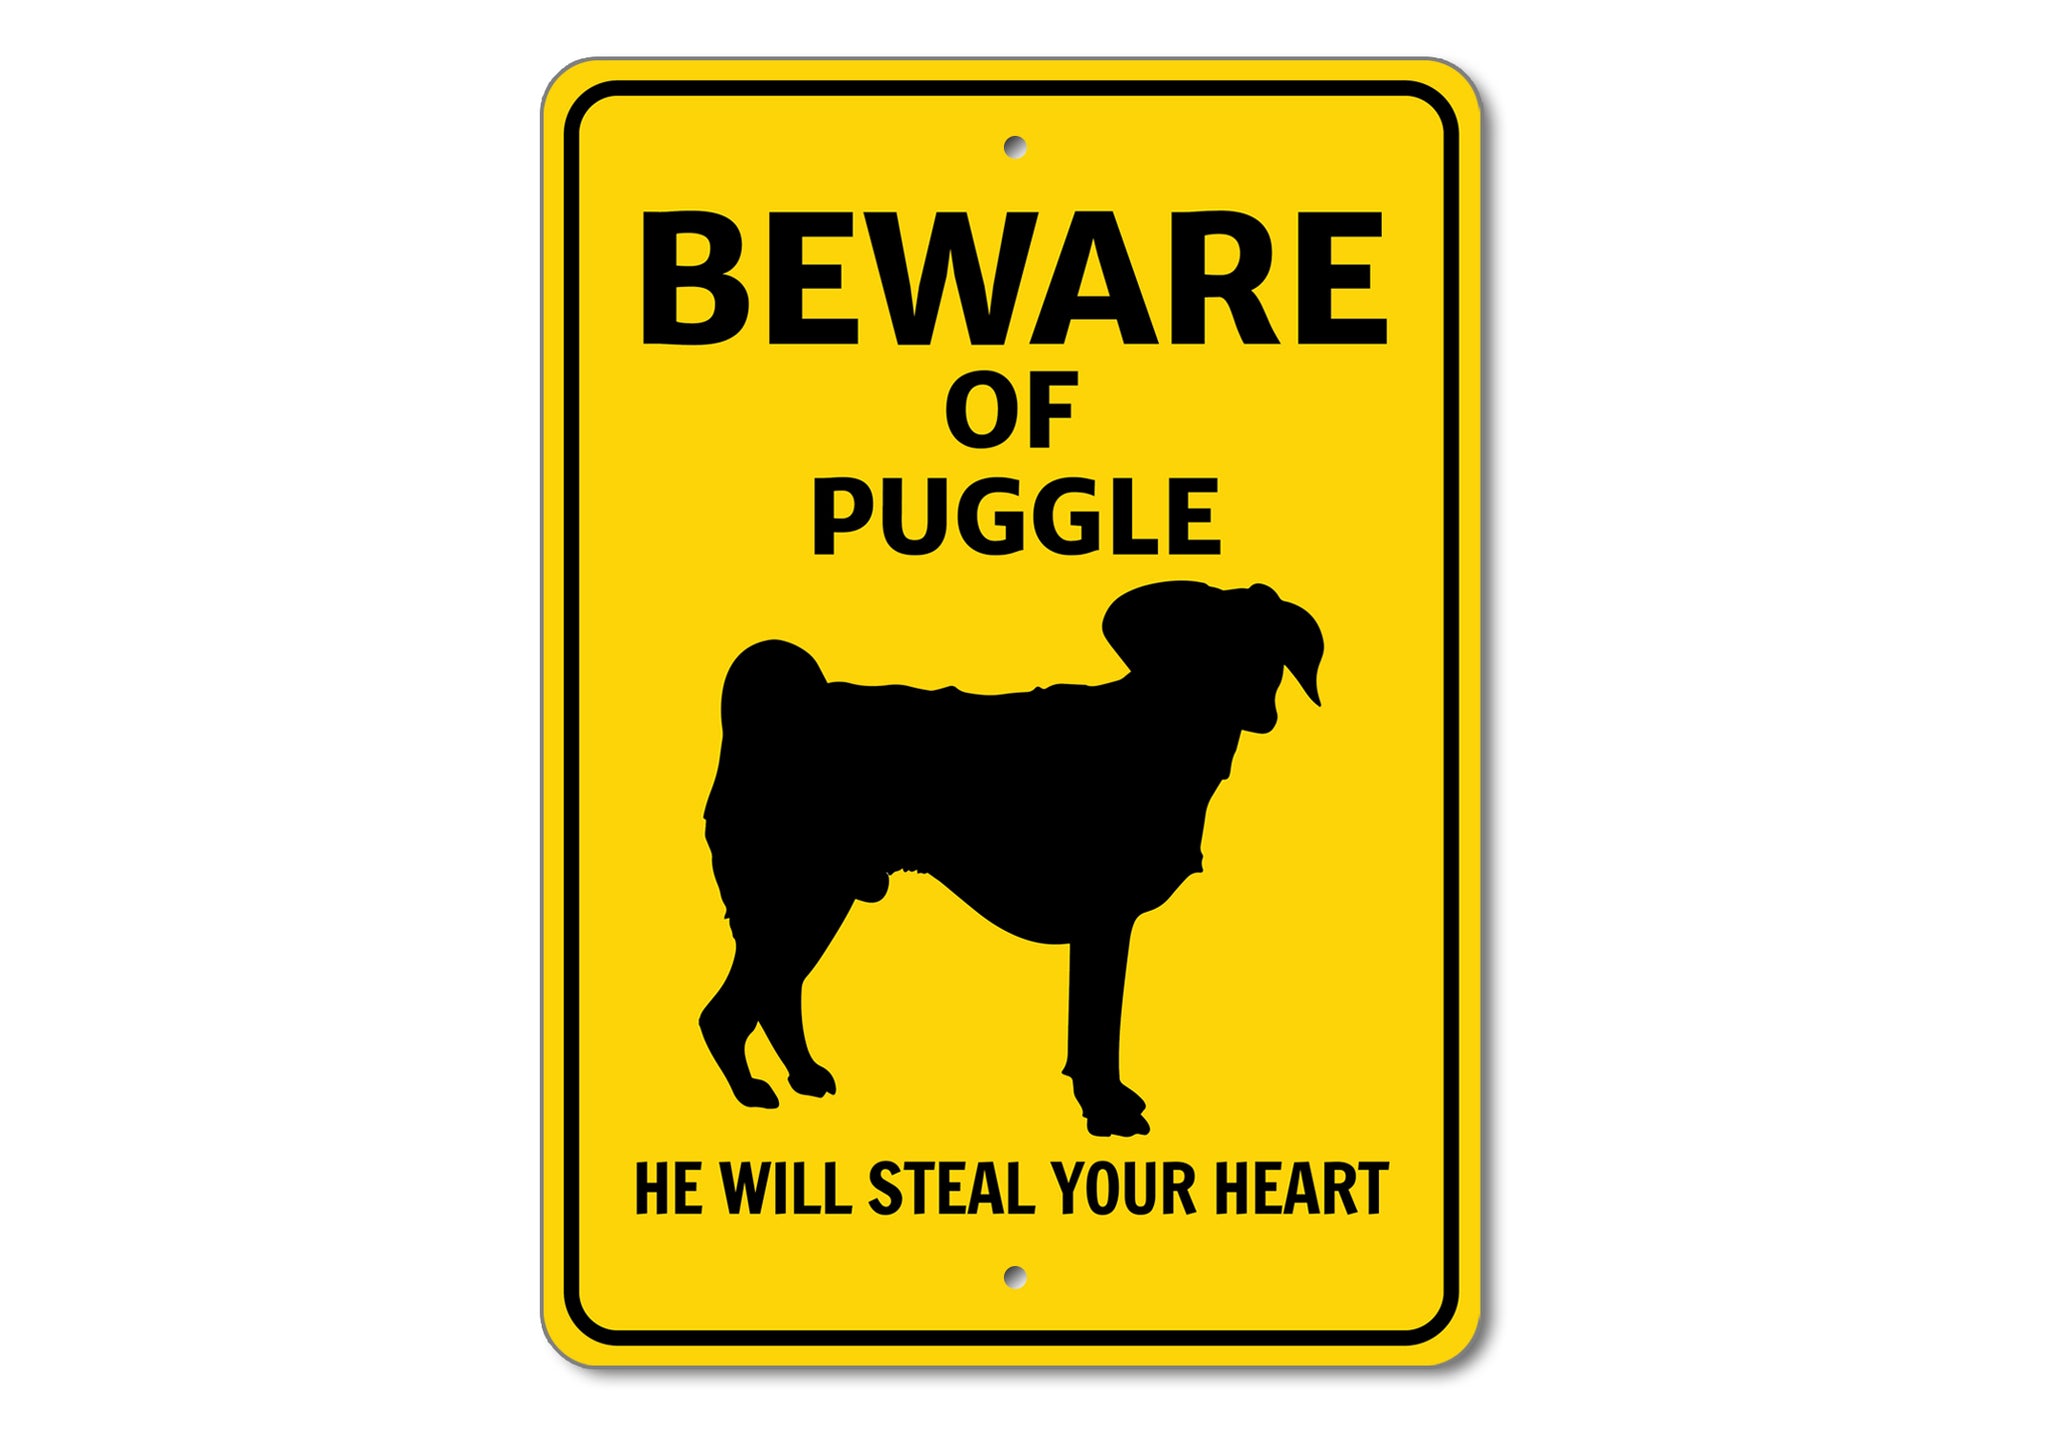 Beware He Will Steal Your Heart K9 Sign - Dog Names Starting with "P and R"